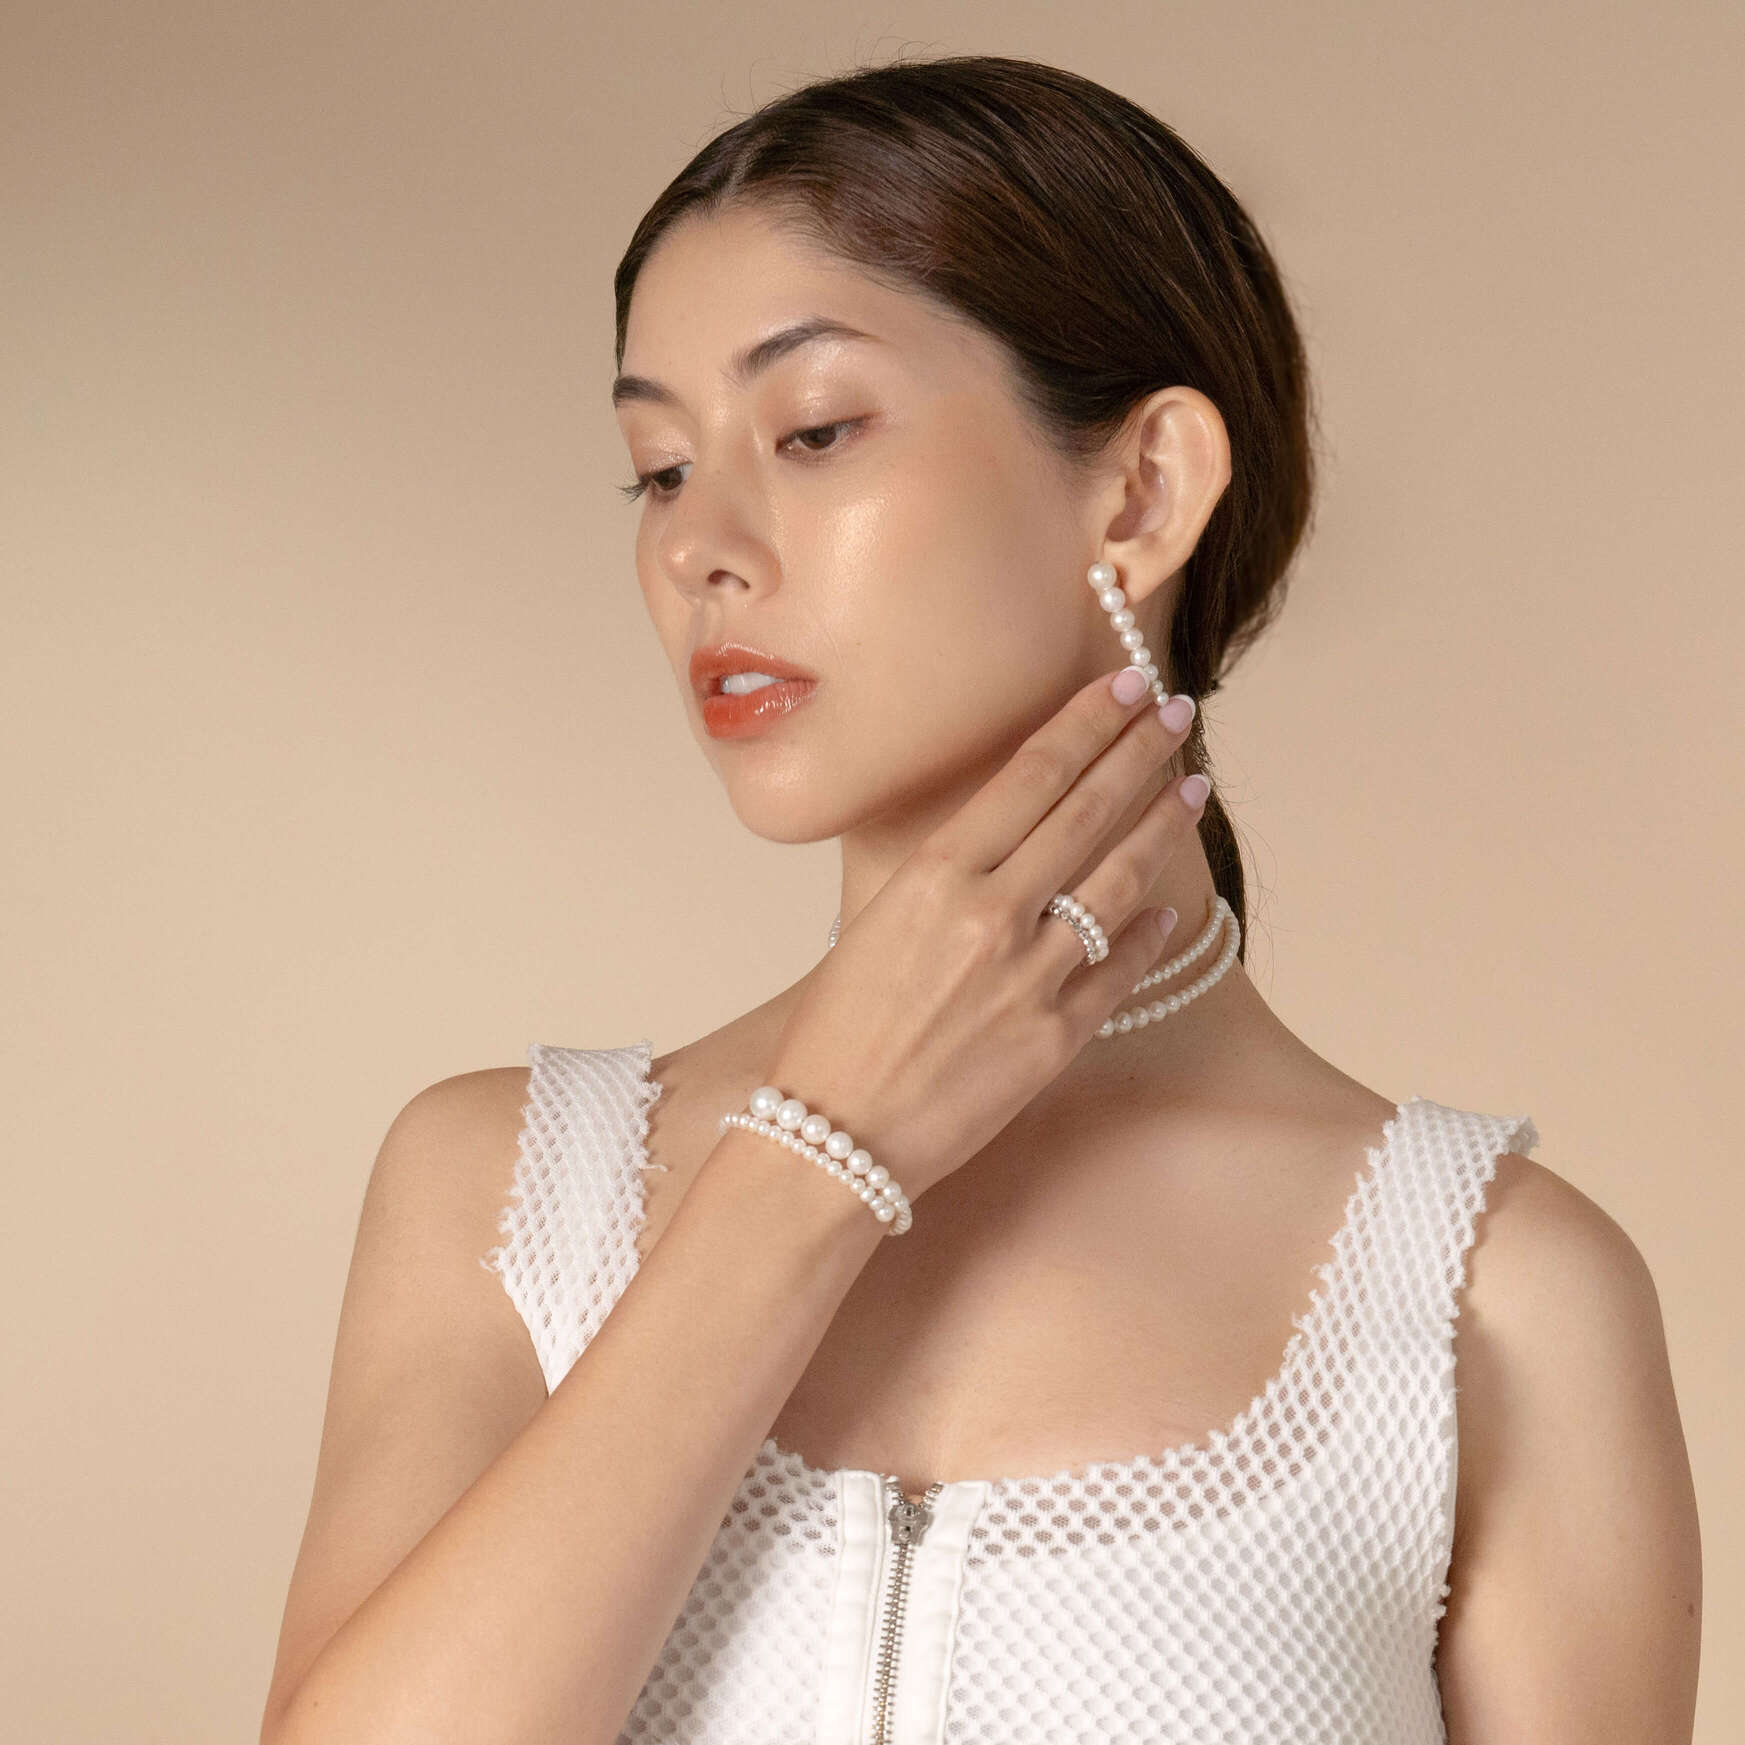 Sophisticated woman wearing white top and pearl necklace, enhanced by a beautiful spiral pearl bracelet.